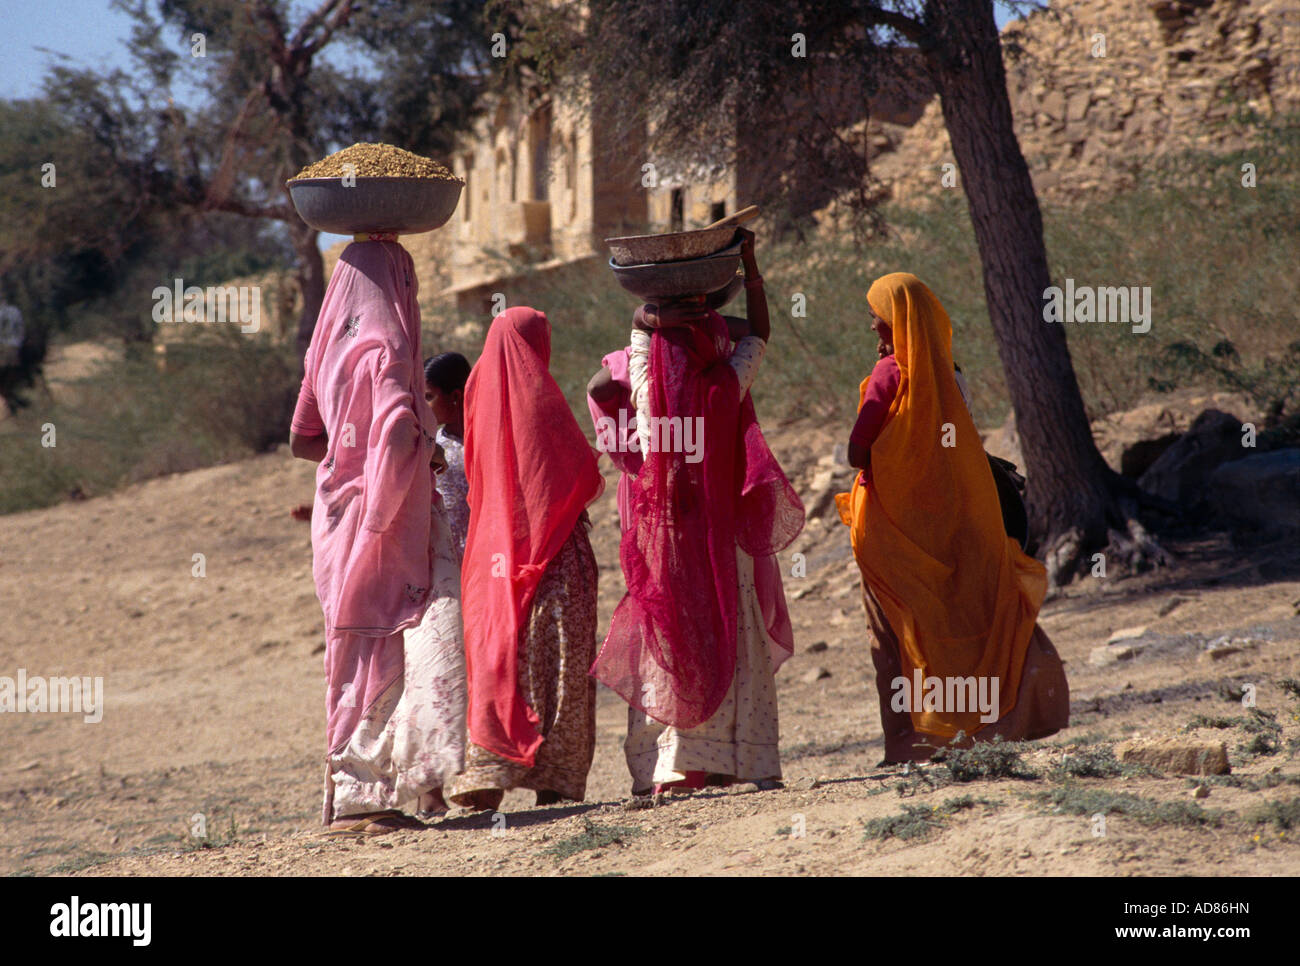 Jaisalmer India Women Carrying Rubble On Their Heads Stock Photo